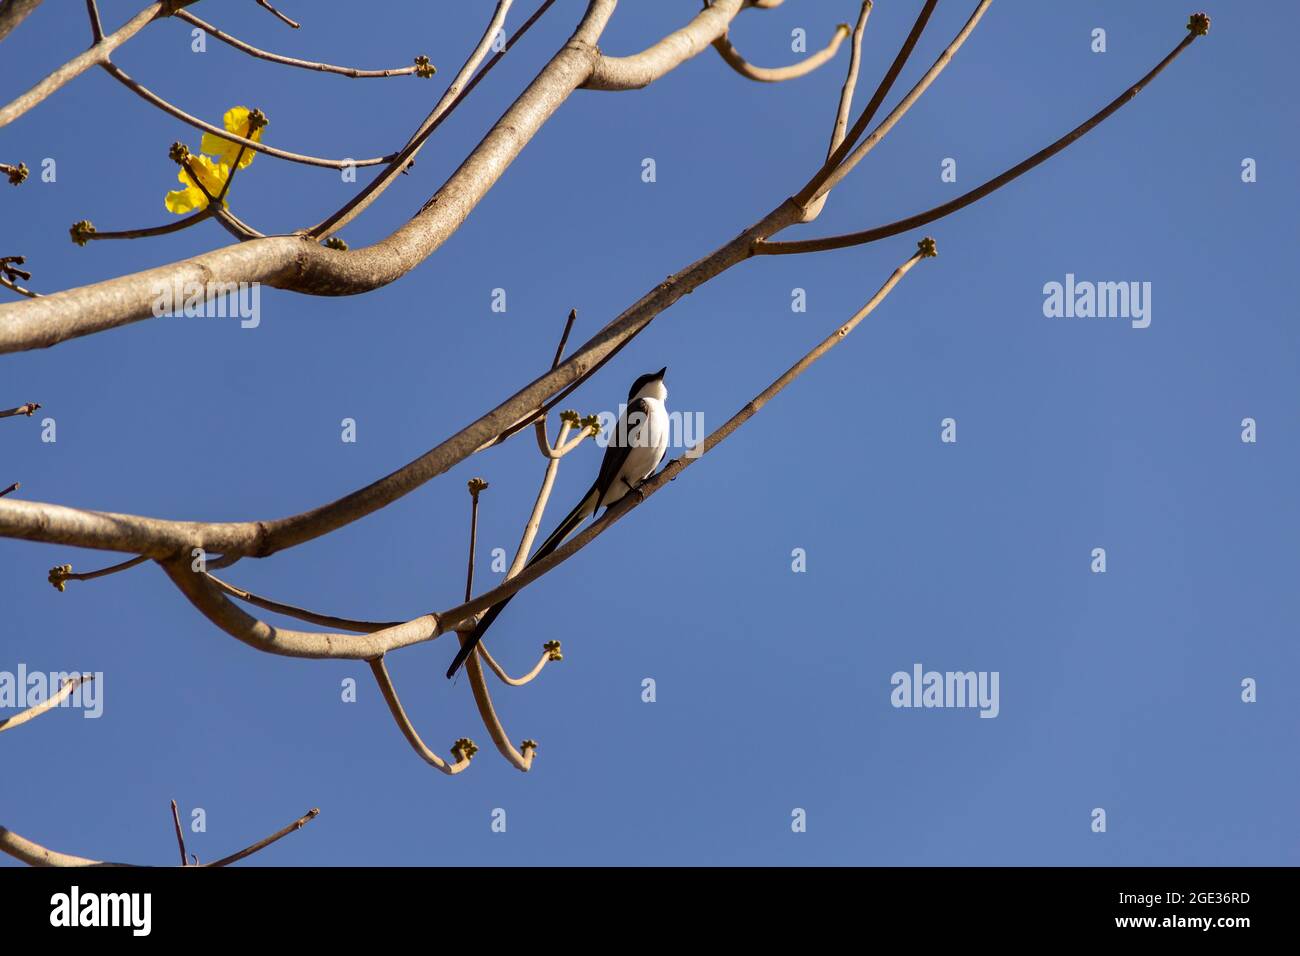 A bird (Tyrannus savana) perched on a leafless tree branch with the ...